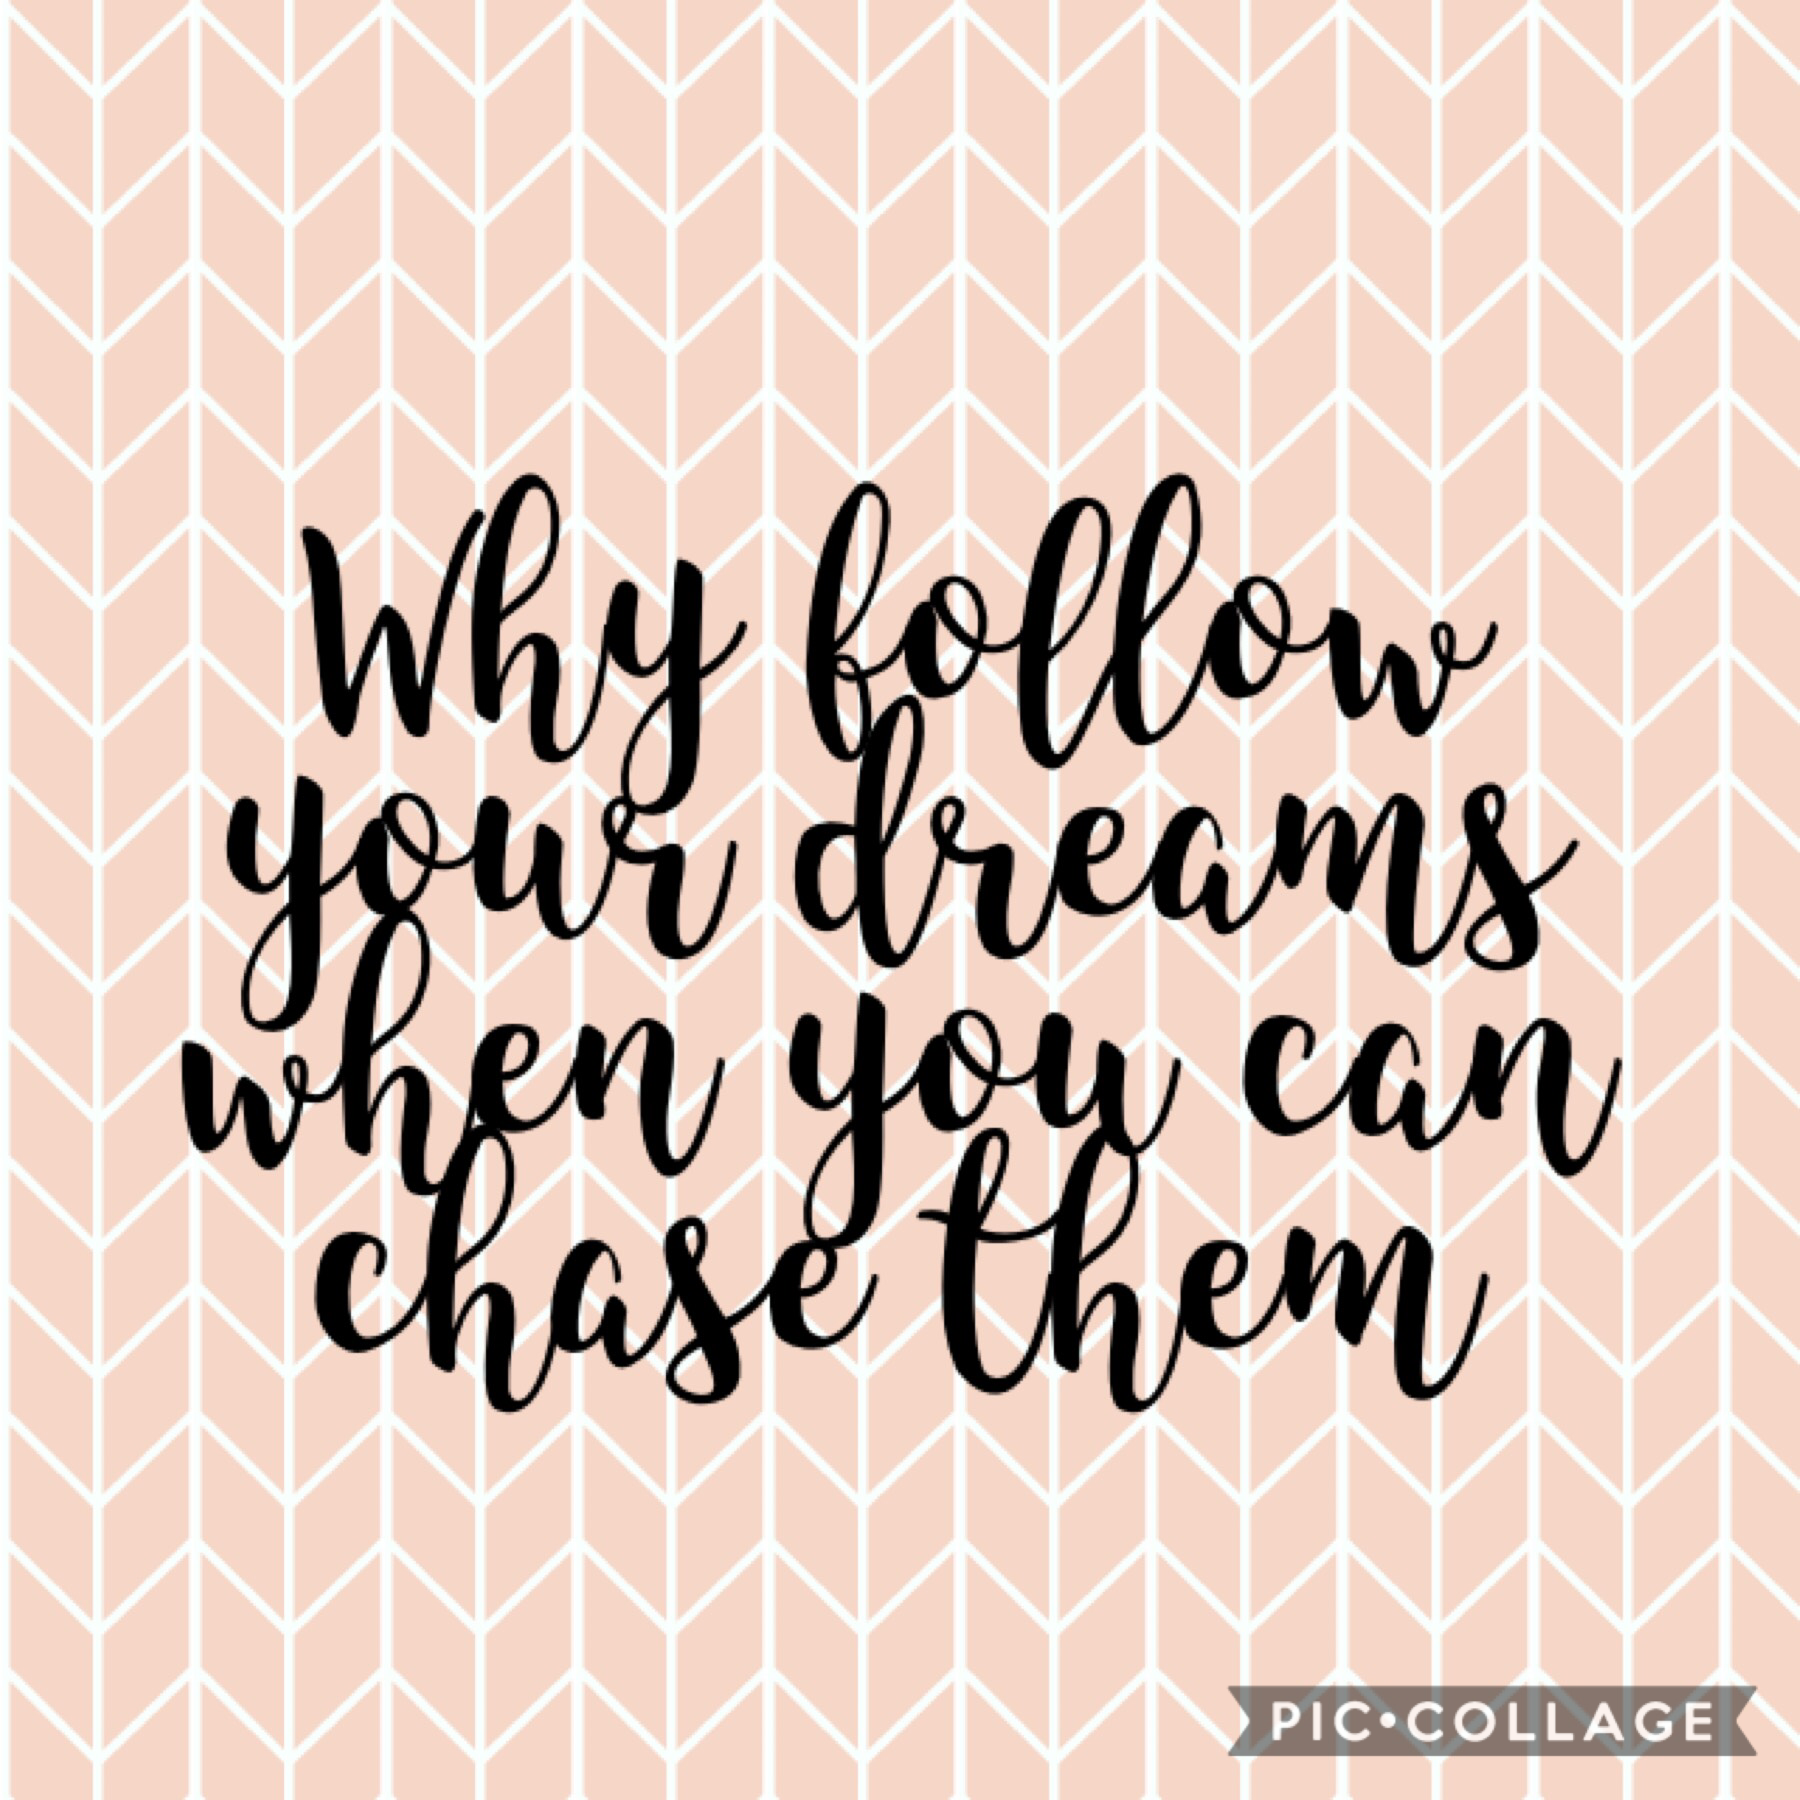 Why follow your dreams when you can chase them 